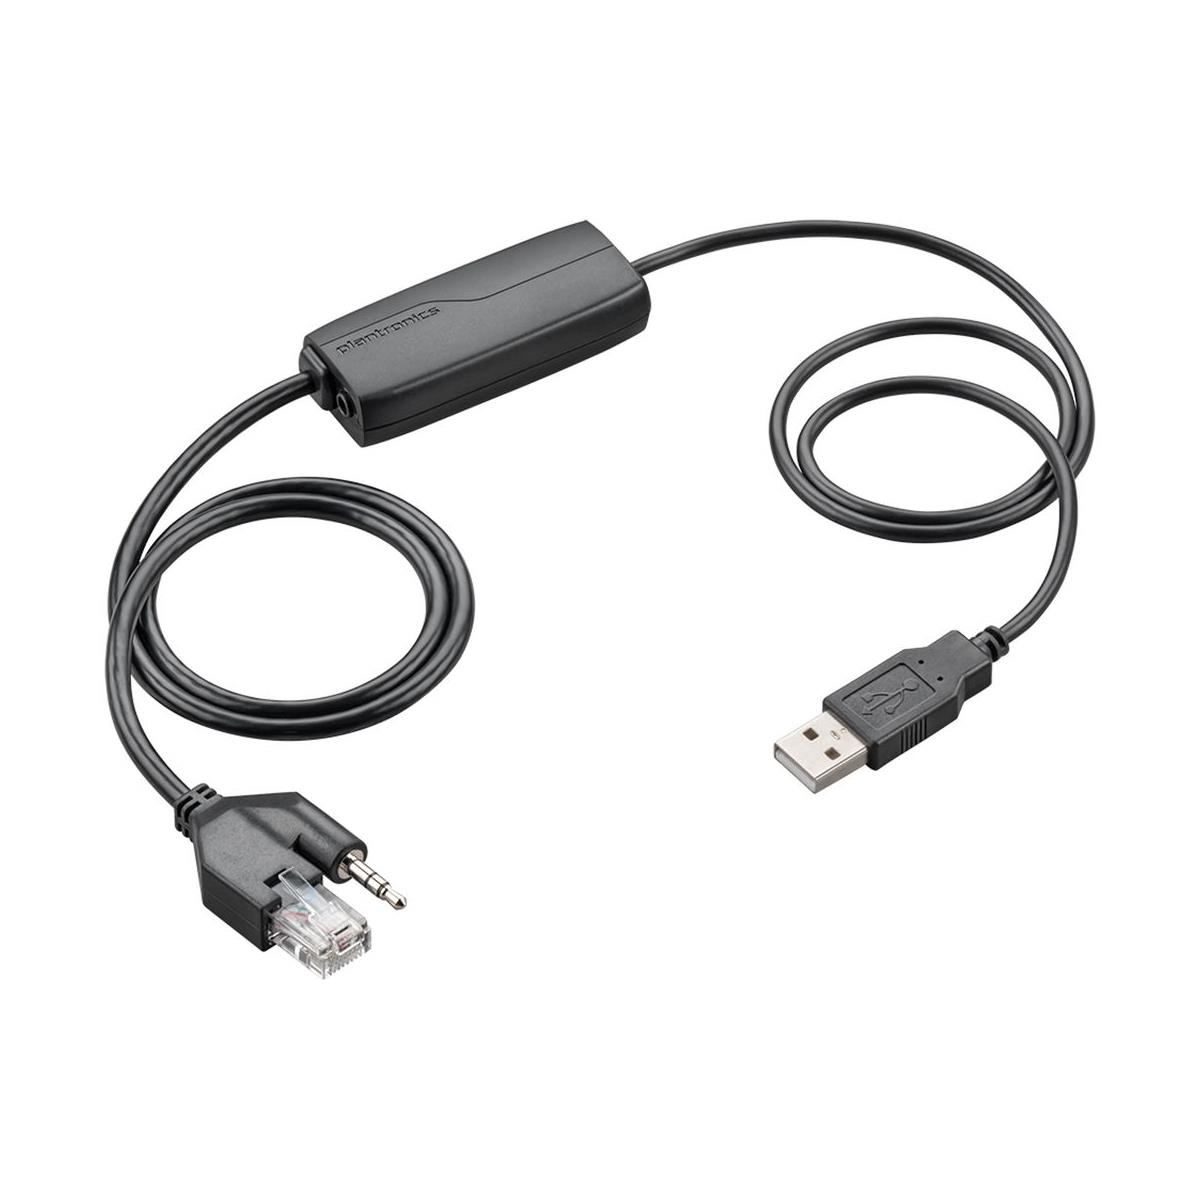 Image of Plantronics APU-72 Electronic Hook Switch Cable for Cisco Phone